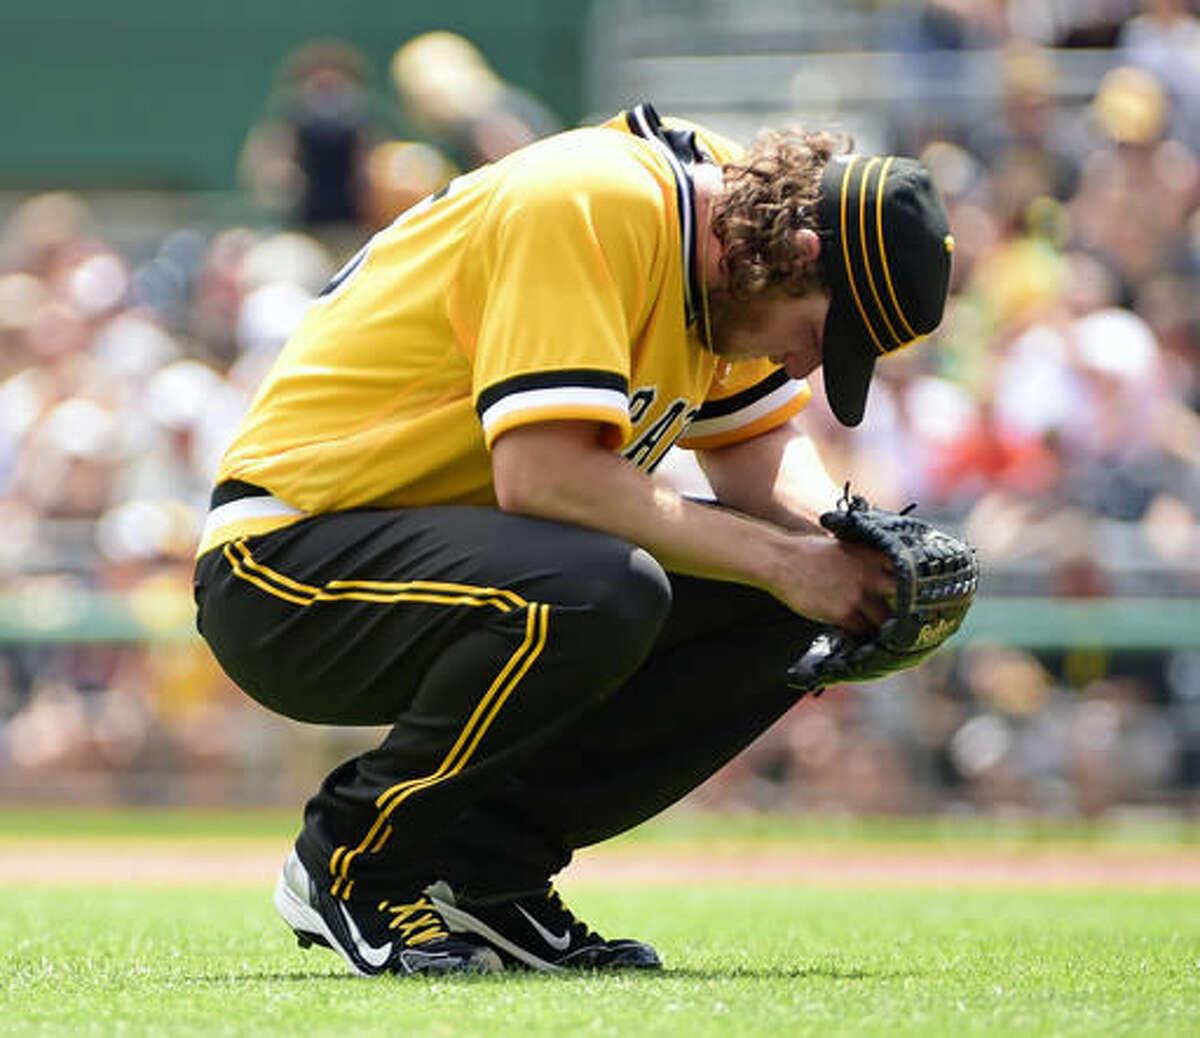 Pittsburgh Pirates starting pitcher Gerrit Cole takes a break as umpires review a call in the first inning of a baseball game against the Cincinnati Reds in Pittsburgh, Sunday, Aug. 7, 2016. (AP Photo/Fred Vuich)